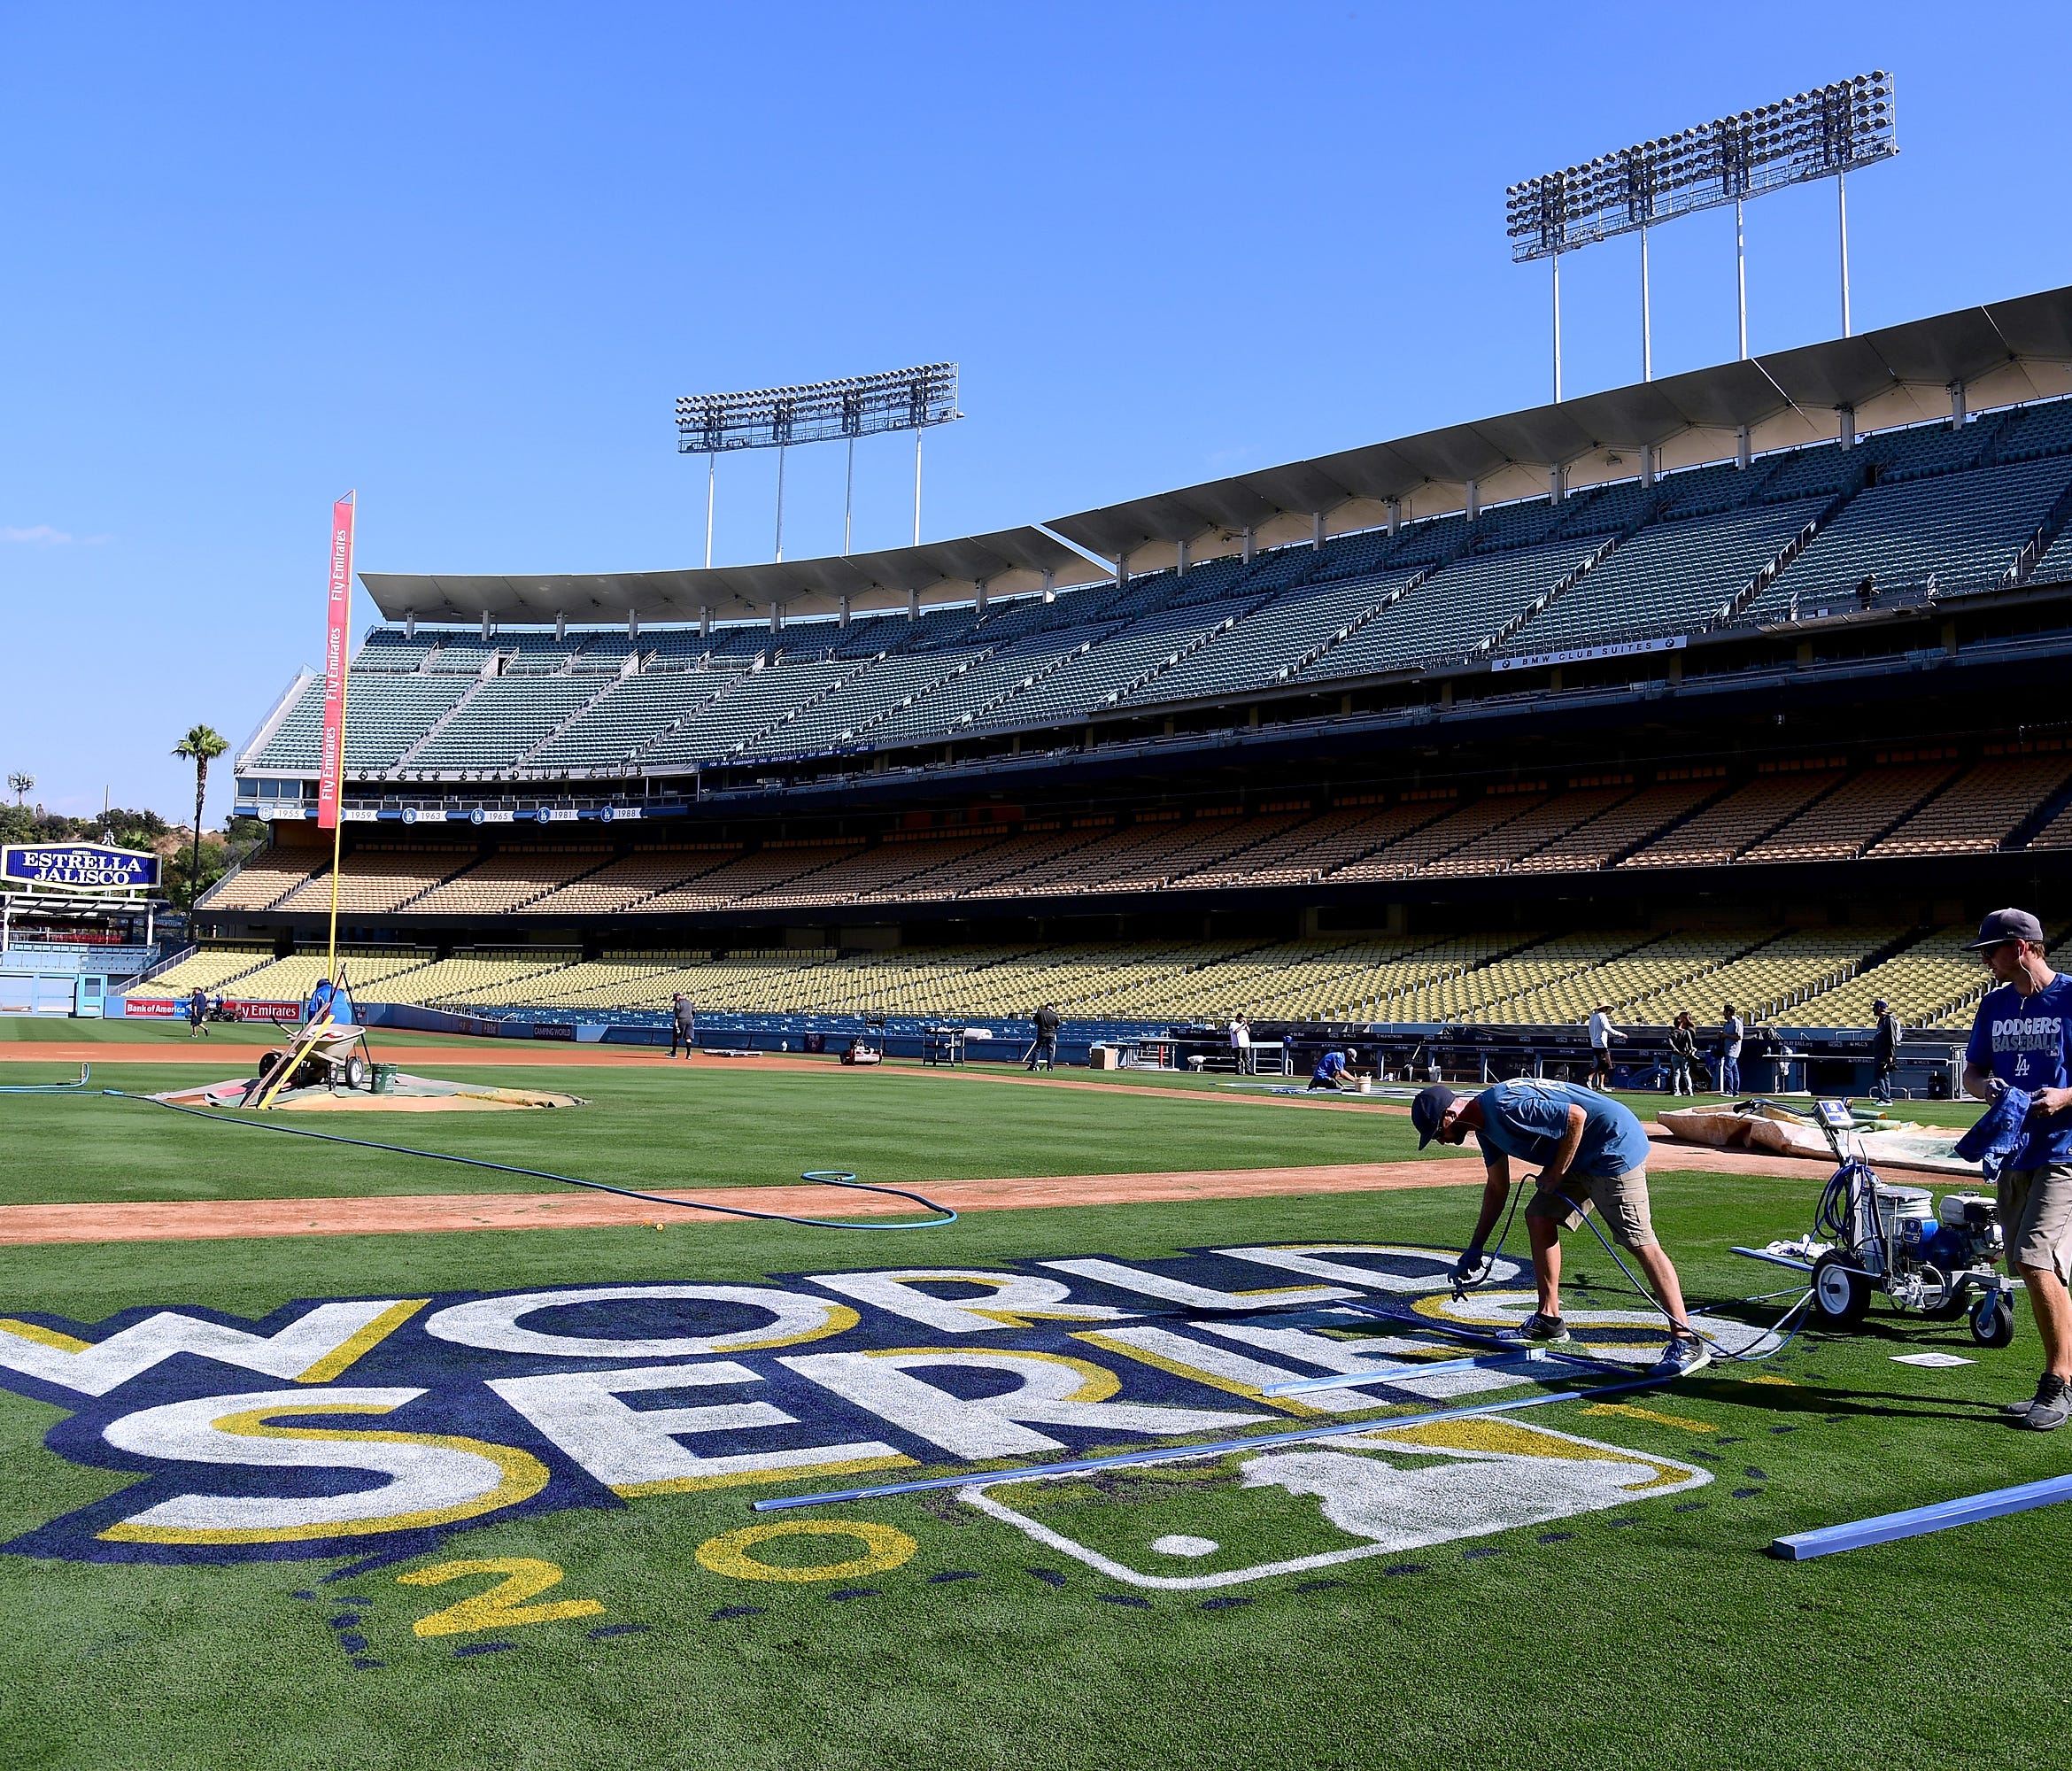 Dodger Stadium preparations are underway for the World Series, which may bring a game-time temperature in the mid-90s.